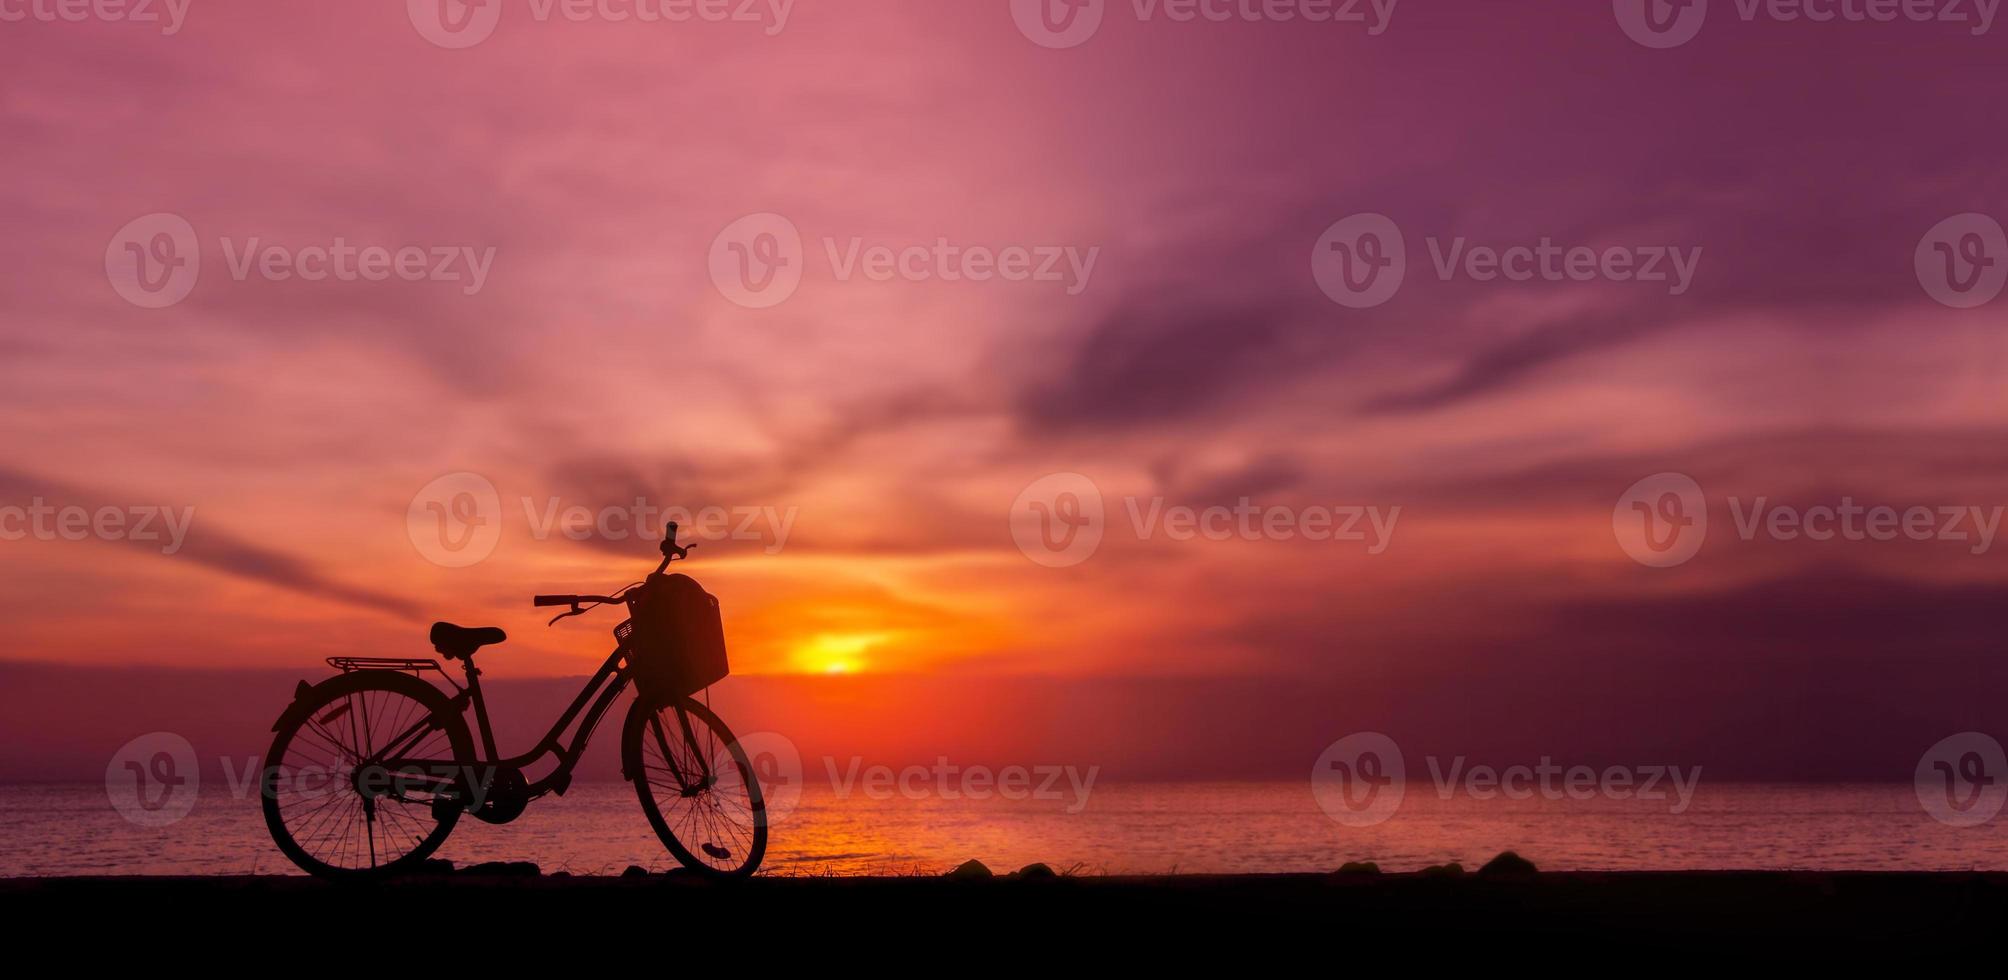 Silhouette Photo of Bicycle park in front of the Lake in Sunset. Twilight Sky and Lake as background. a Zero Carbon Vehicle surrounded by Nature. Environment Care and Sustainable Lifestyle